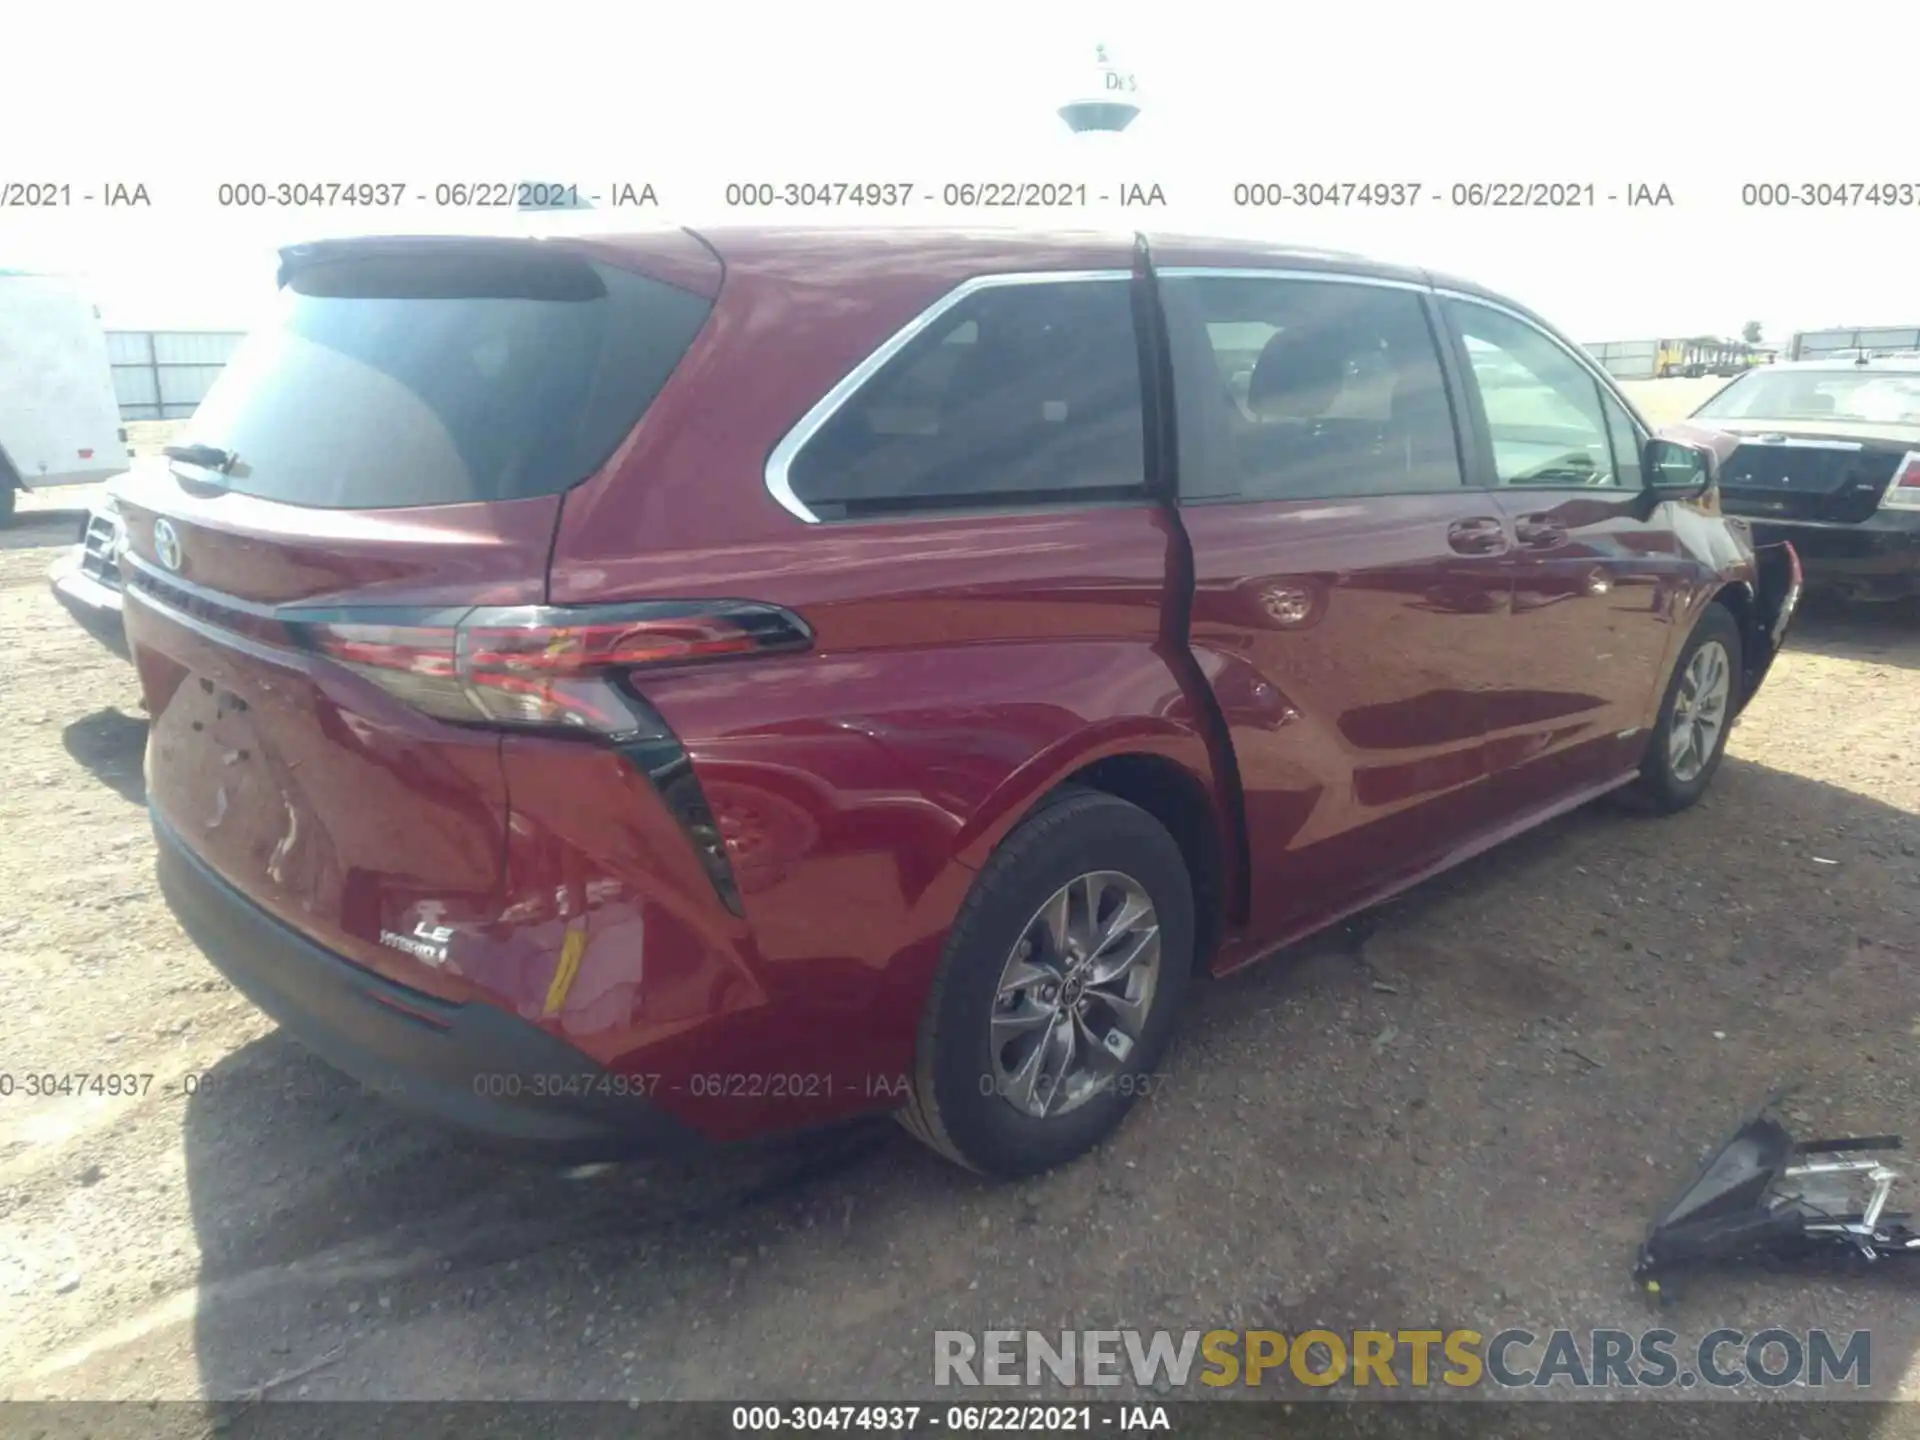 4 Photograph of a damaged car 5TDKRKEC0MS027781 TOYOTA SIENNA 2021